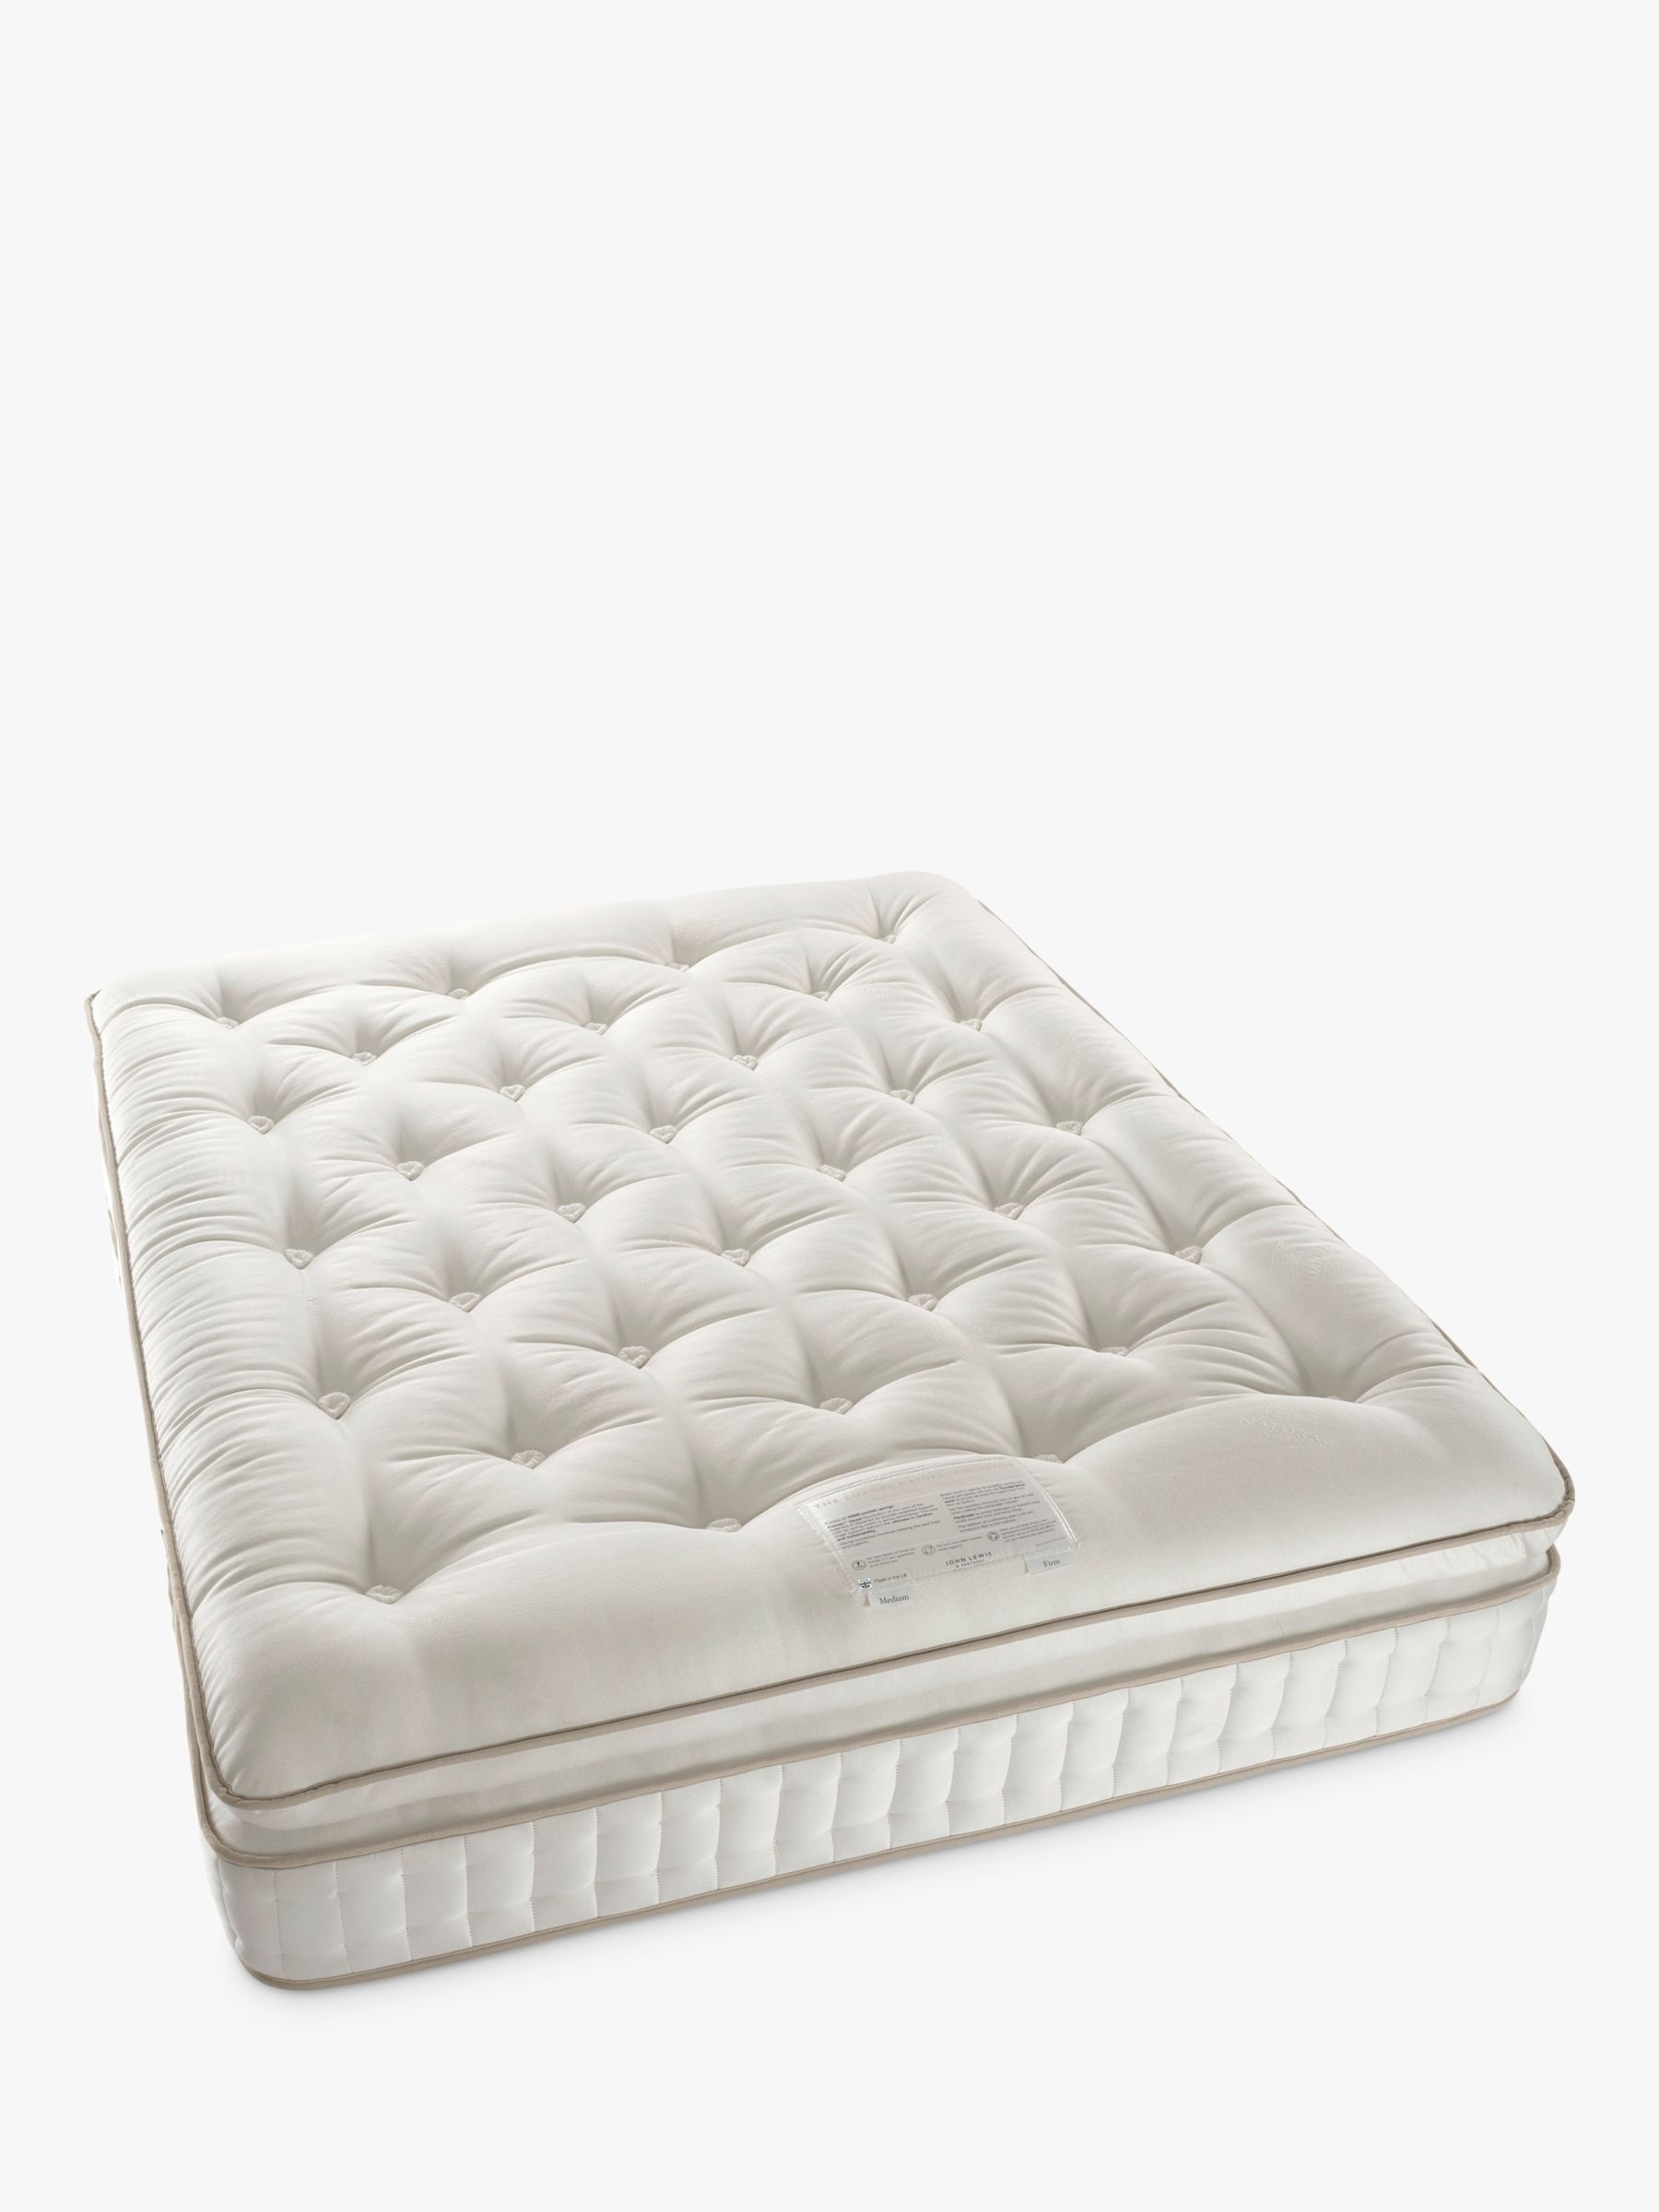 Photo of John lewis luxury natural collection british wool pillowtop 11000 small double firmer tension pocket spring mattress